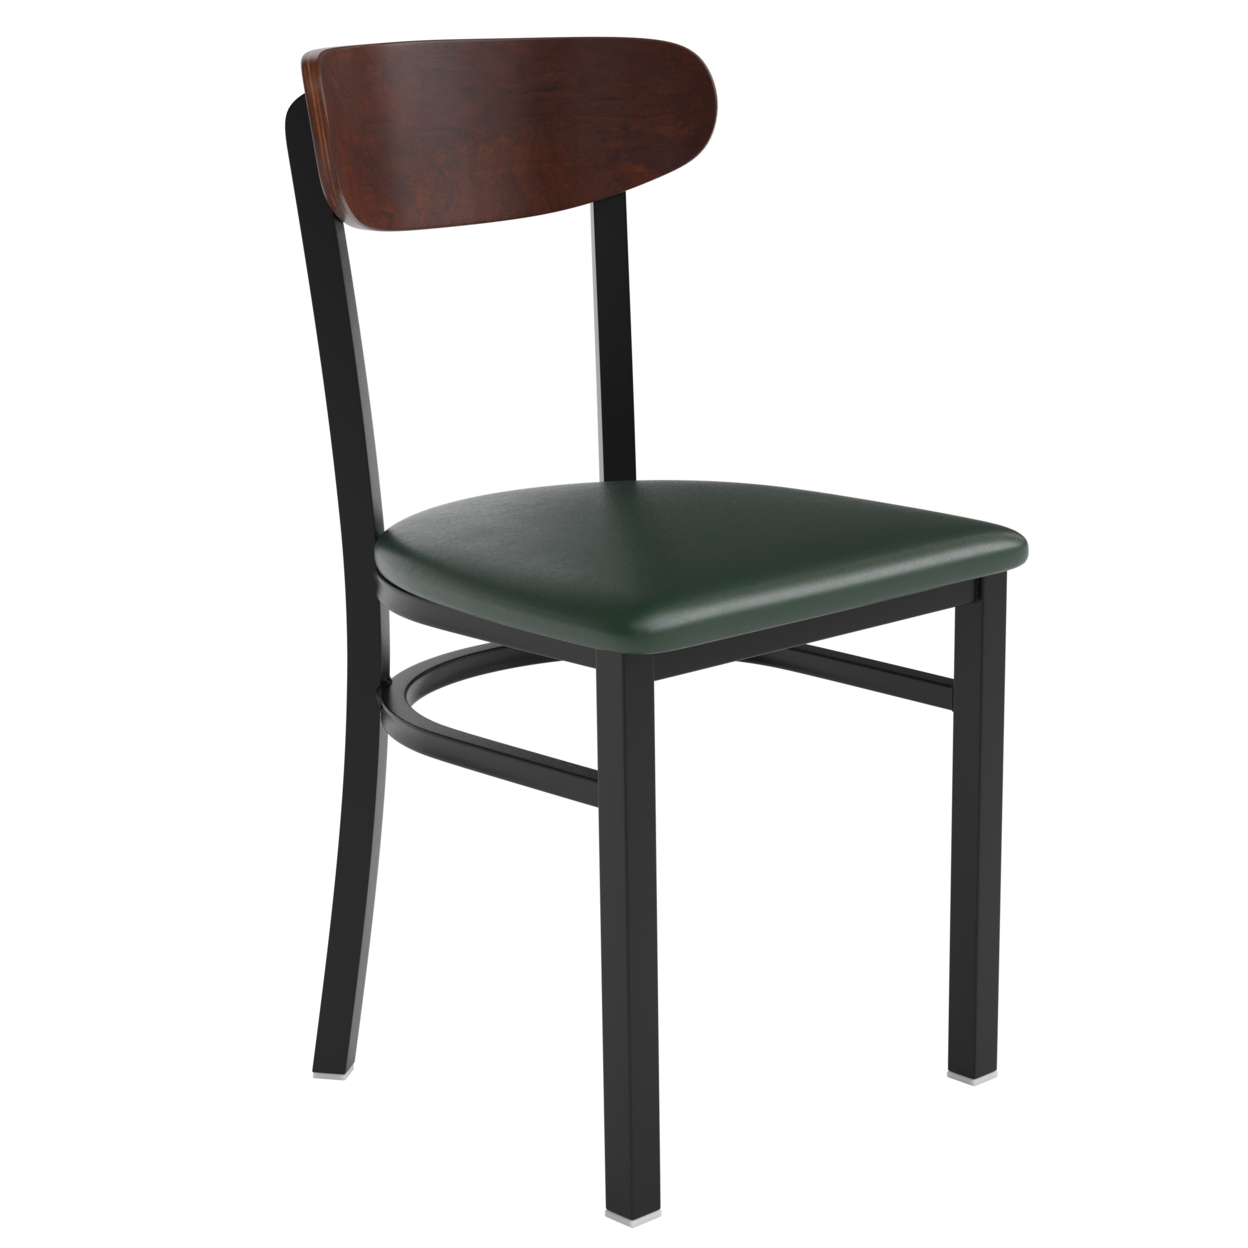 Dining Chair, Walnut Wood Boomerang Back, Green Vinyl Seat And Steel Frame